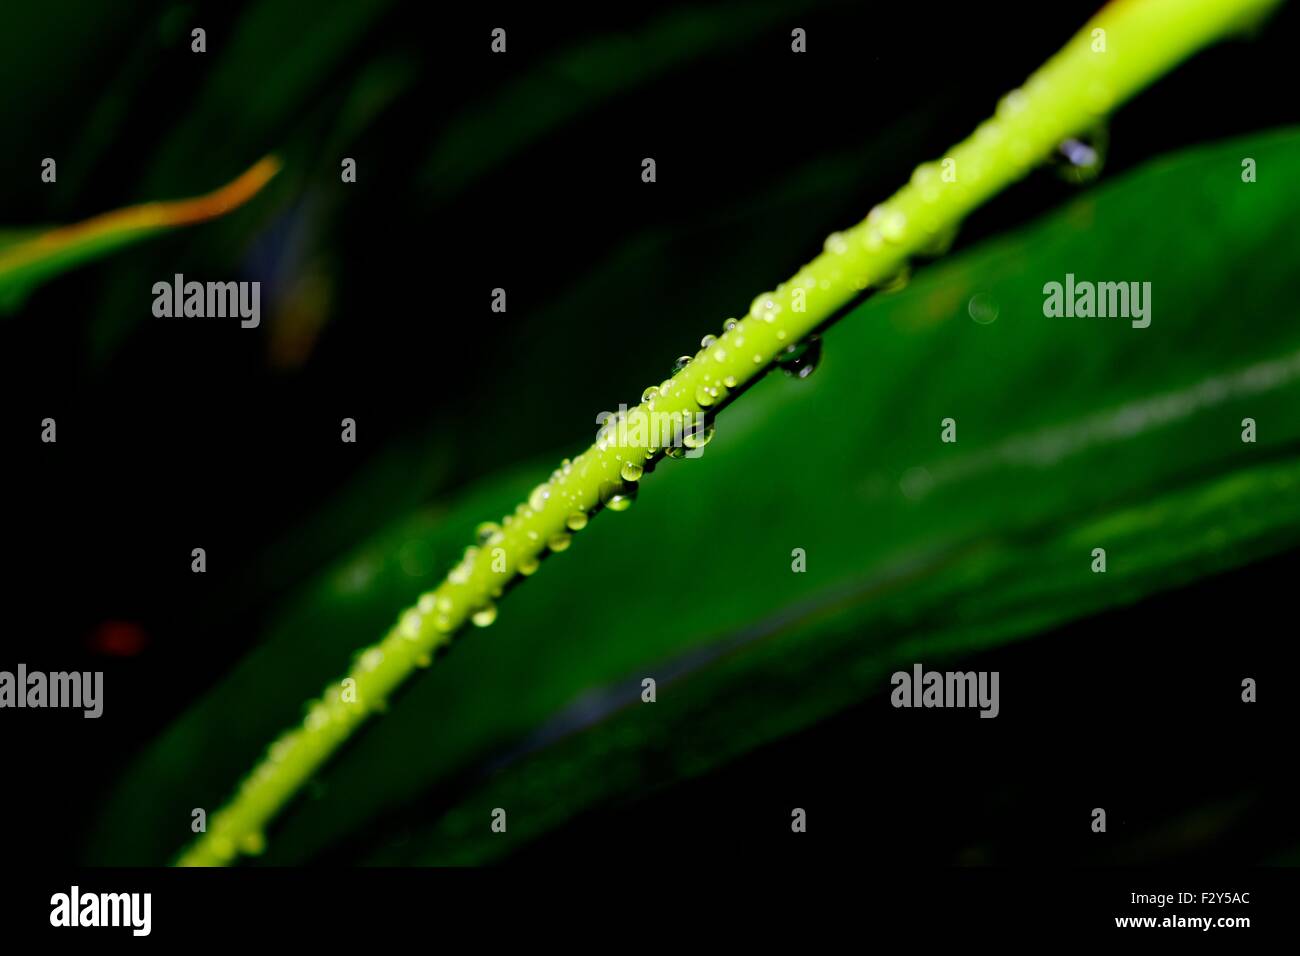 Natural Background – Green Plants Stock Photo